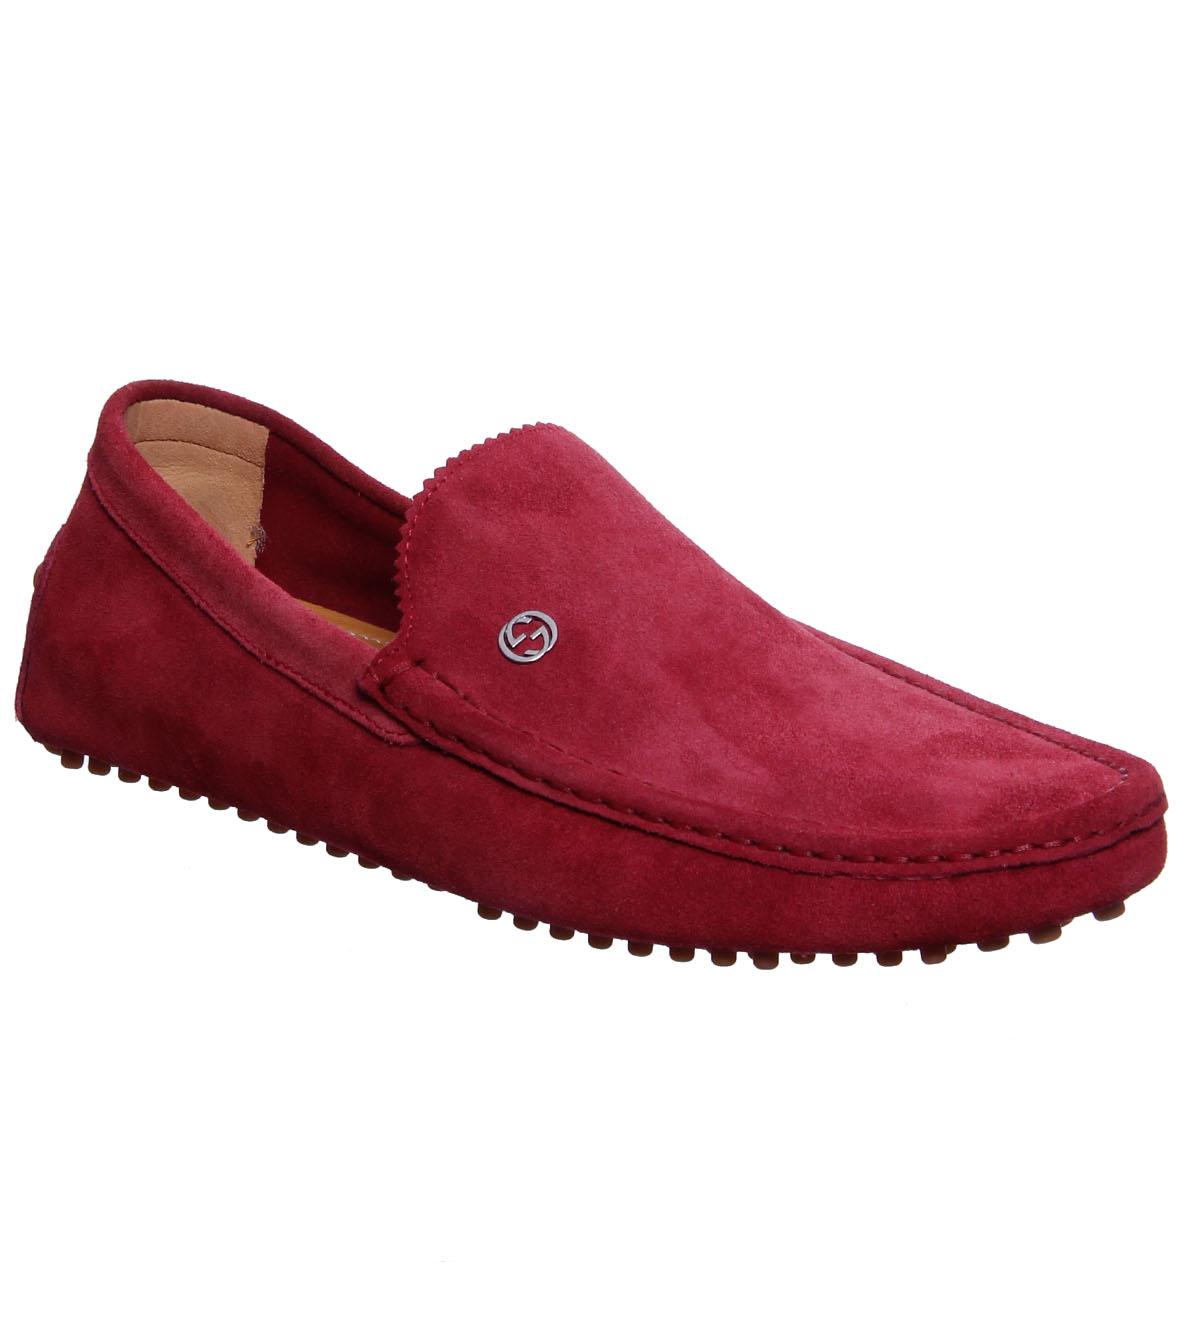 Foto Gucci Cherry Red Suede Driving Shoe foto 63061